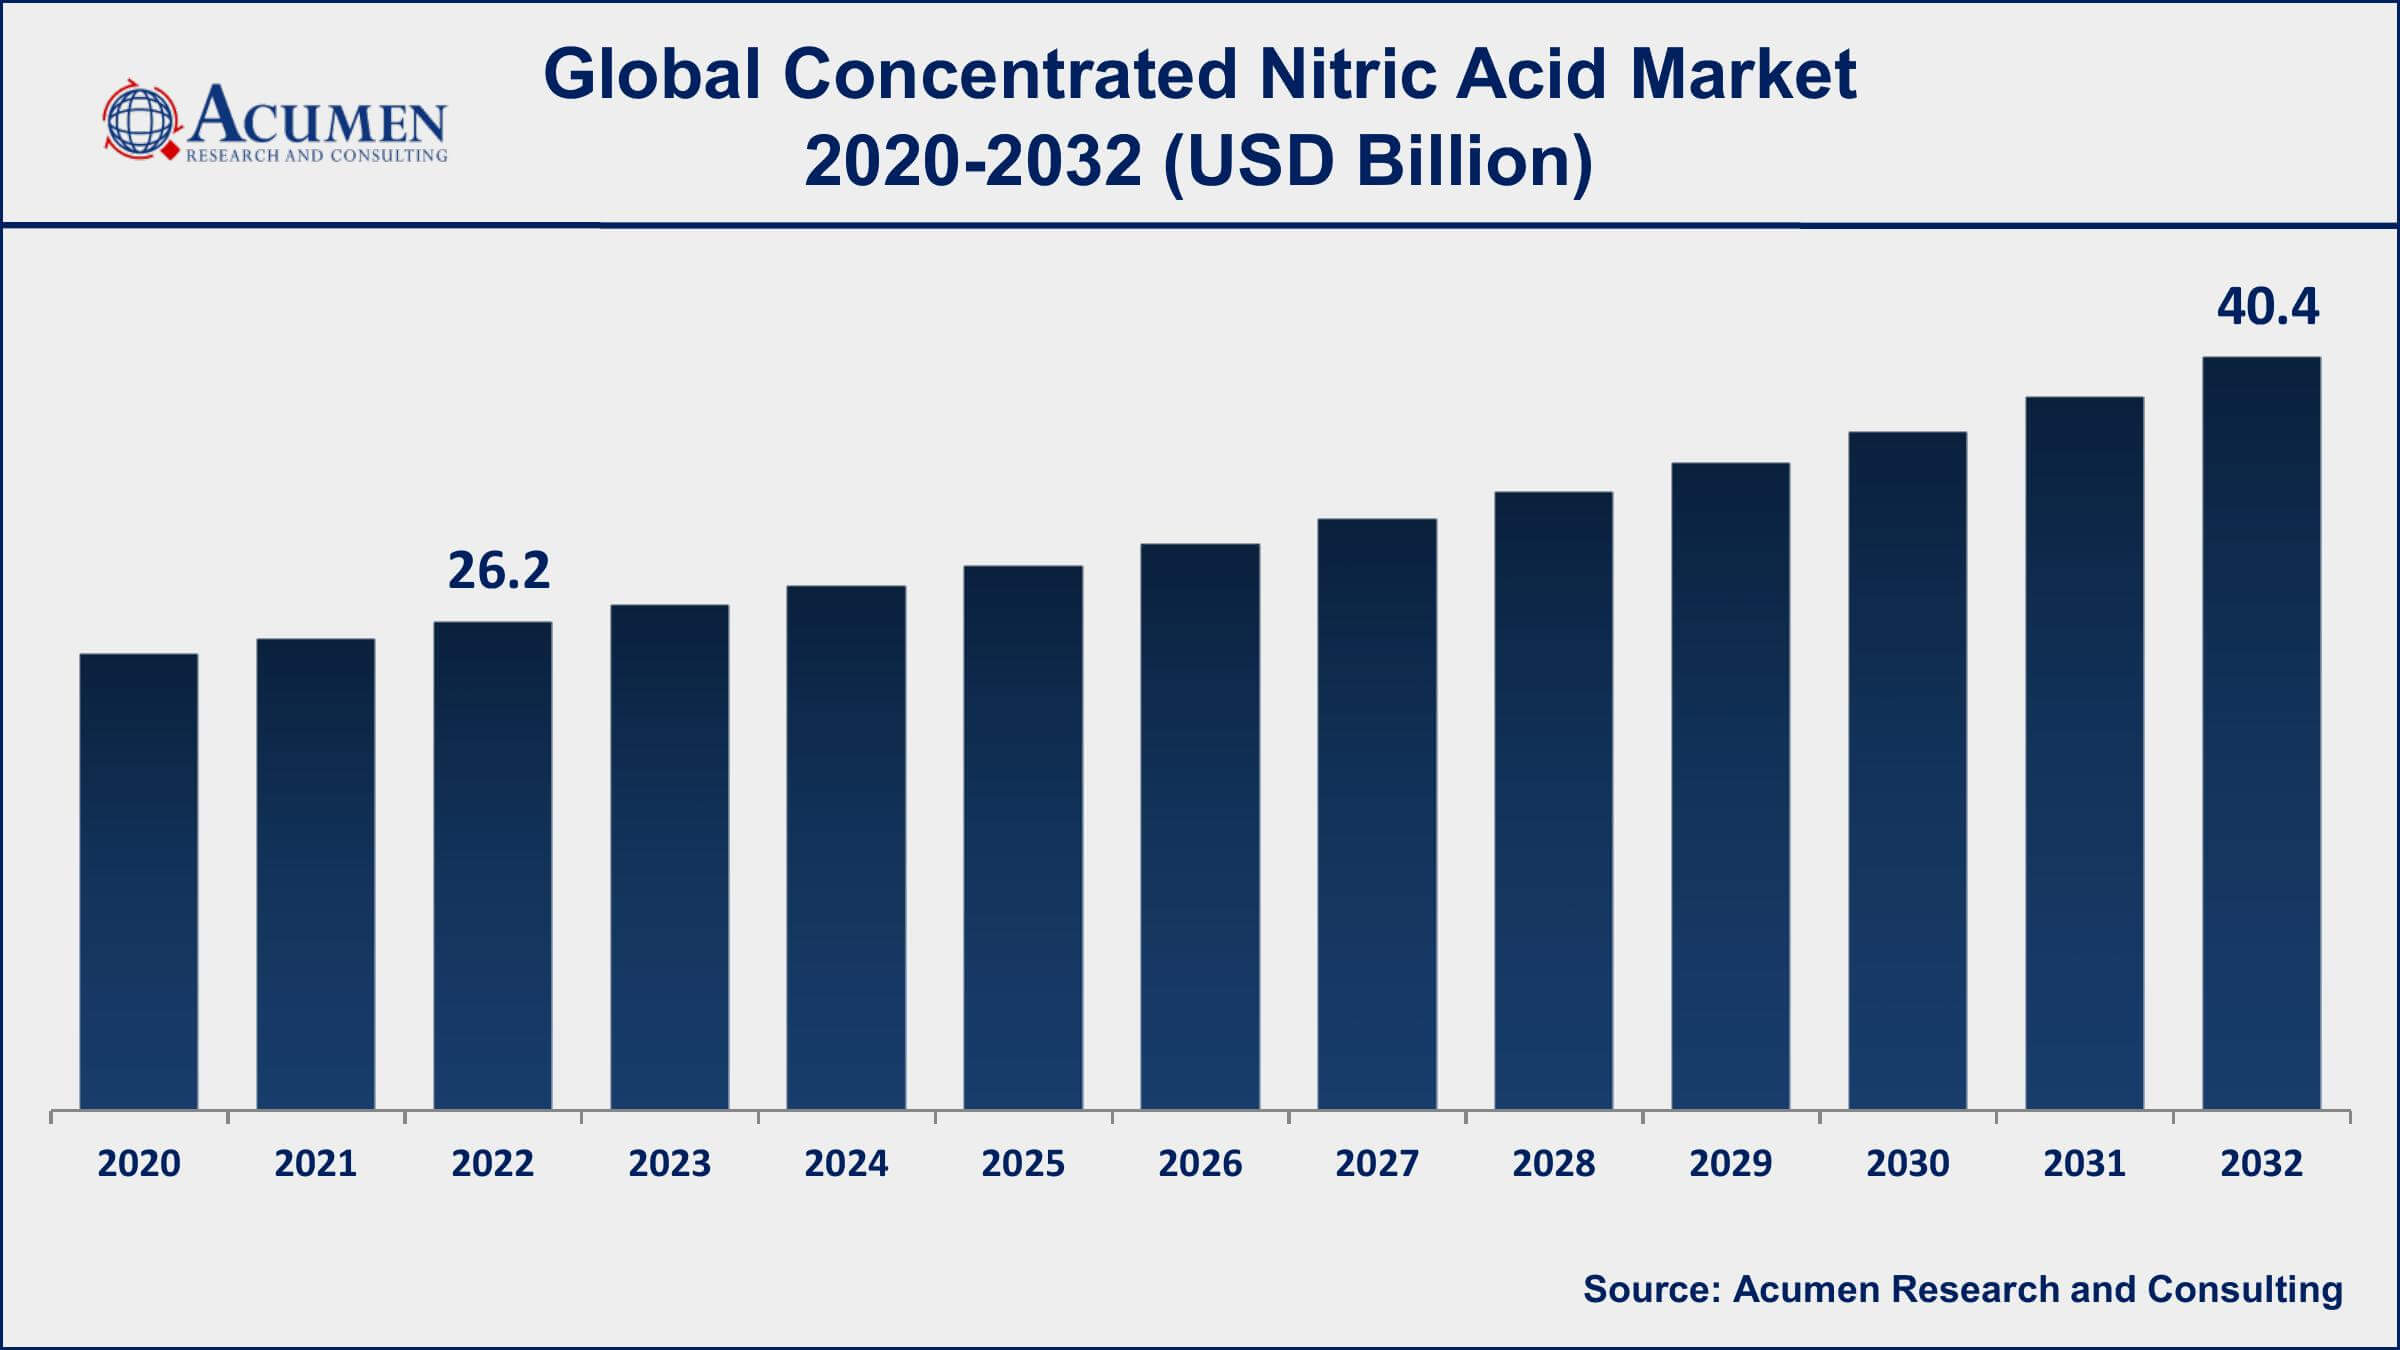 Concentrated Nitric Acid Market Dynamics